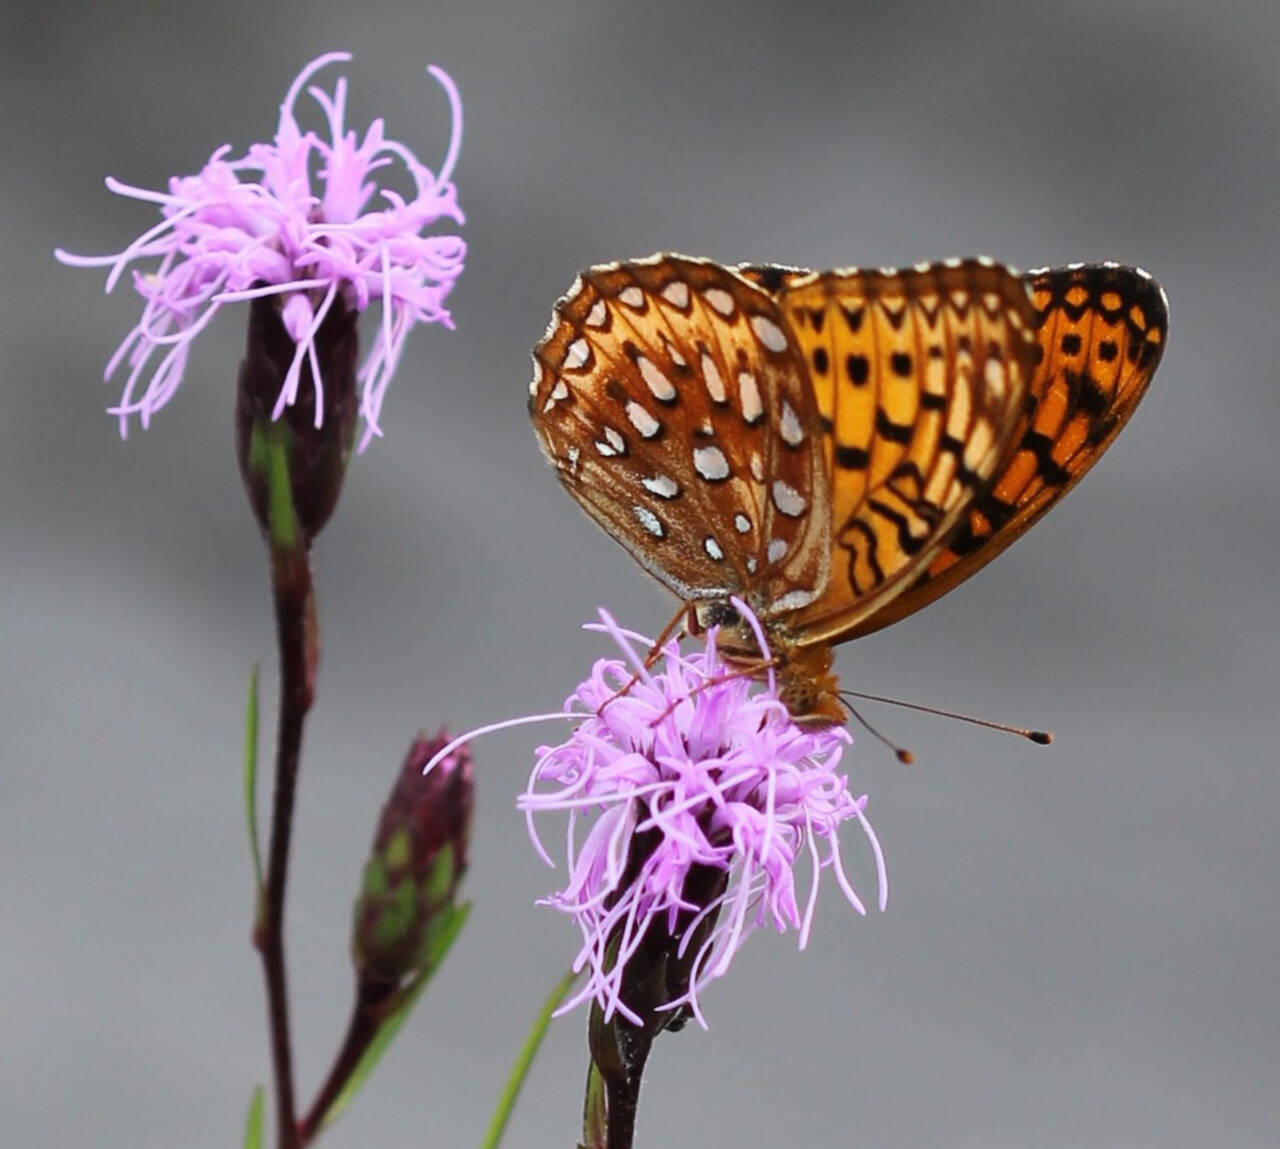 Photo by Rob Routledge, Sault College (Bugwood.org)
Attract butterflies like this fritillary butterfly to your home garden using certain native plants.